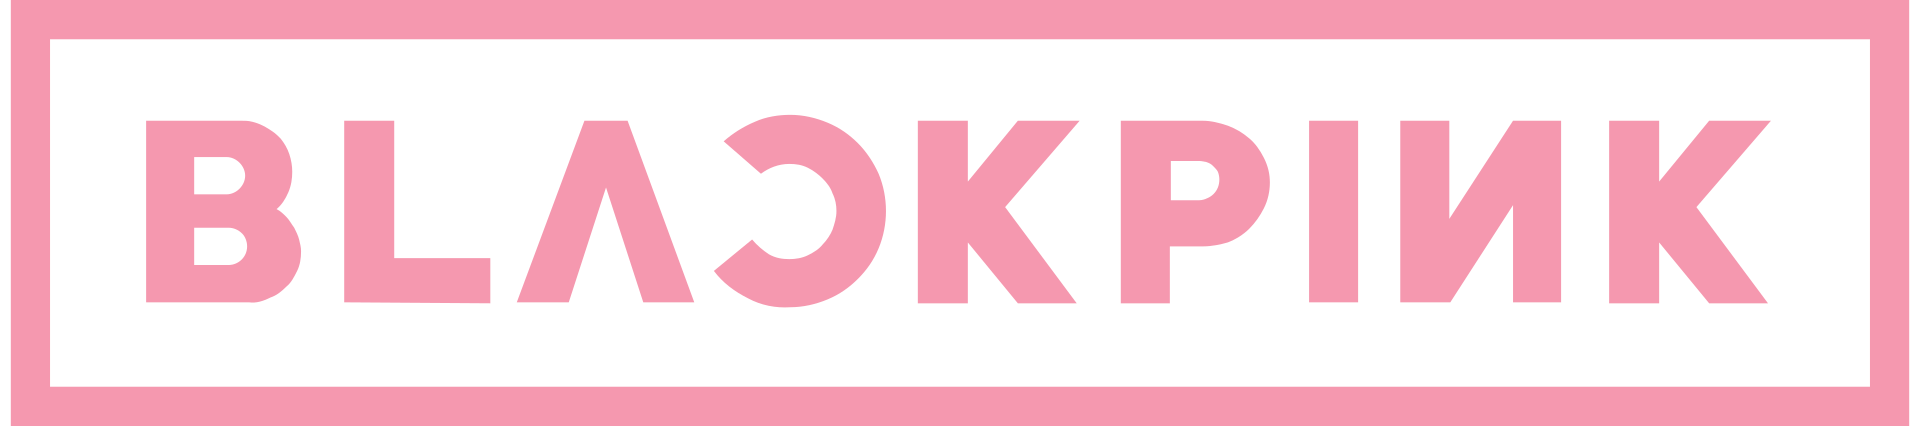 official-logo-of-the-group-in-pink-font